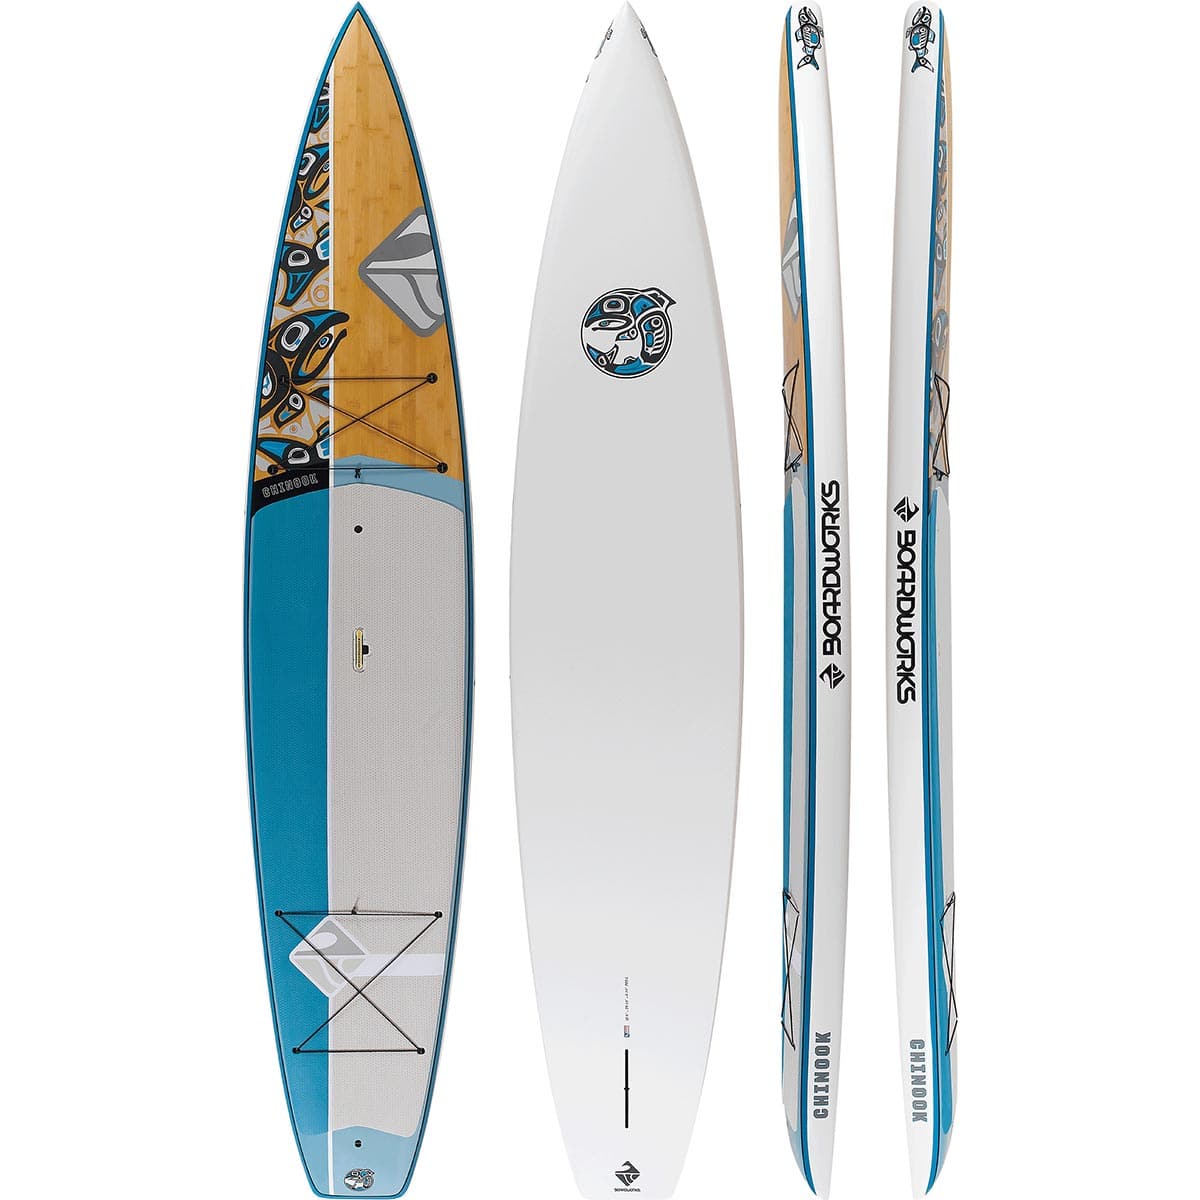 Featuring the Chinook 12'6 rigid sup manufactured by Boardworks shown here from a second angle.